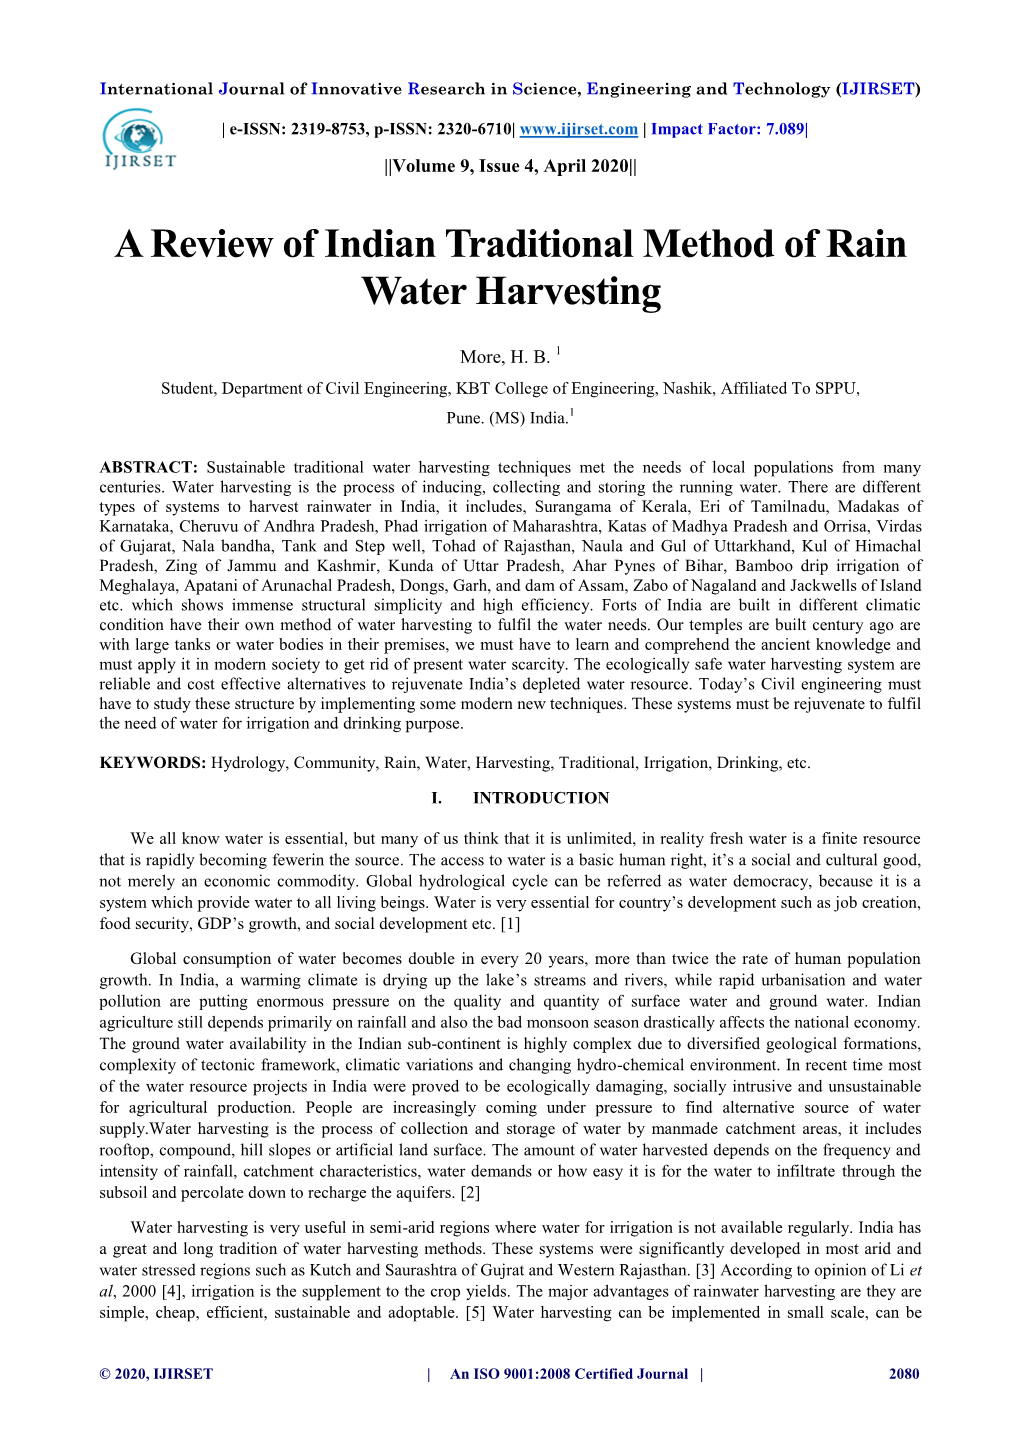 A Review of Indian Traditional Method of Rain Water Harvesting